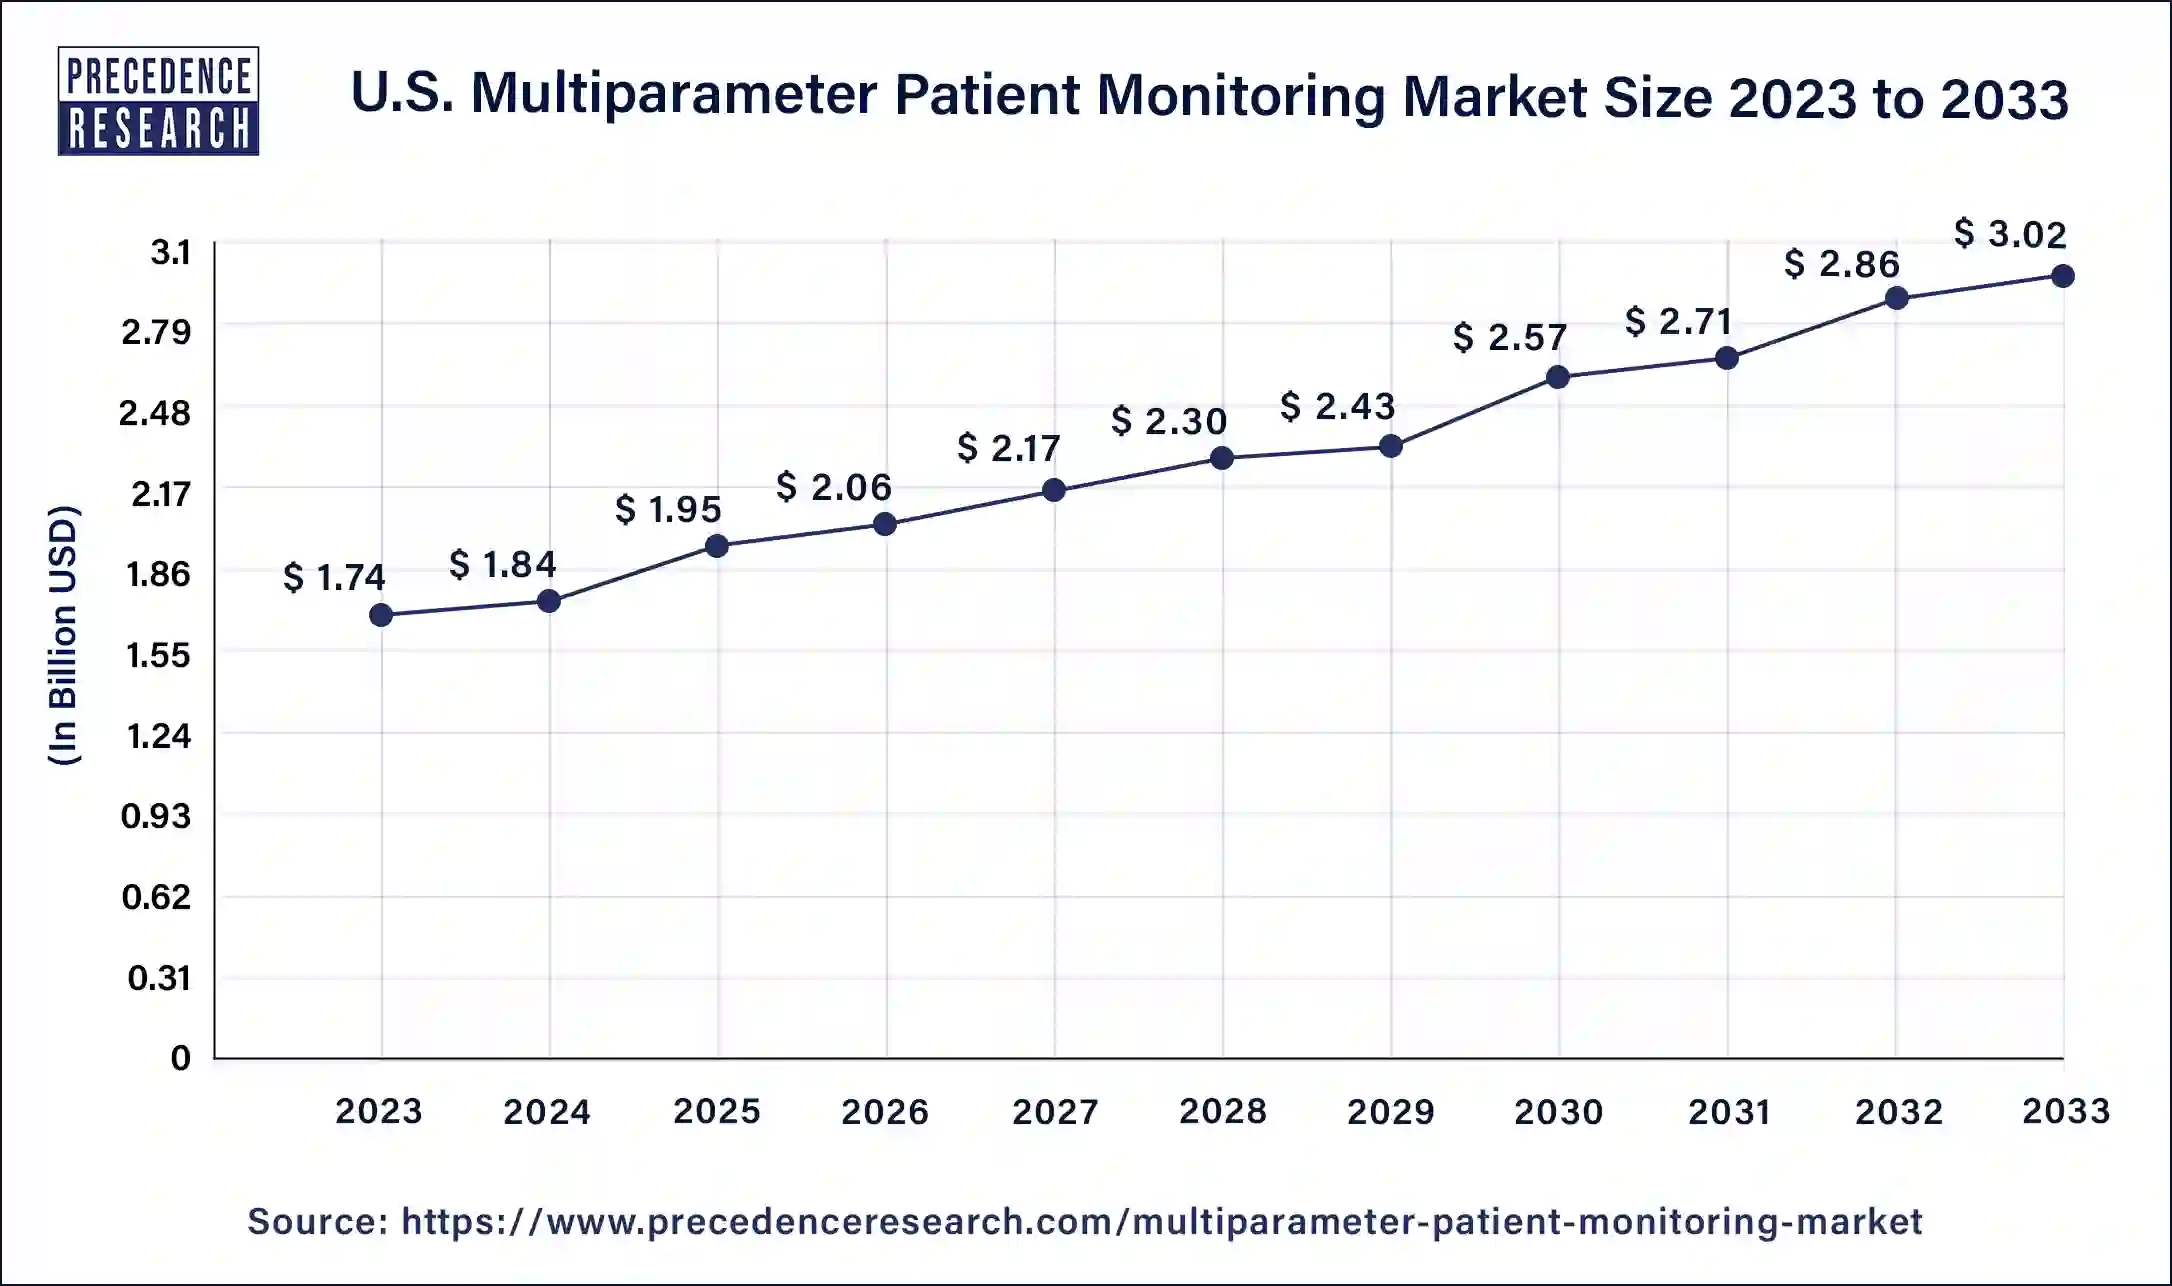 U.S. Multiparameter Patient Monitoring Market Size 2024 to 2033